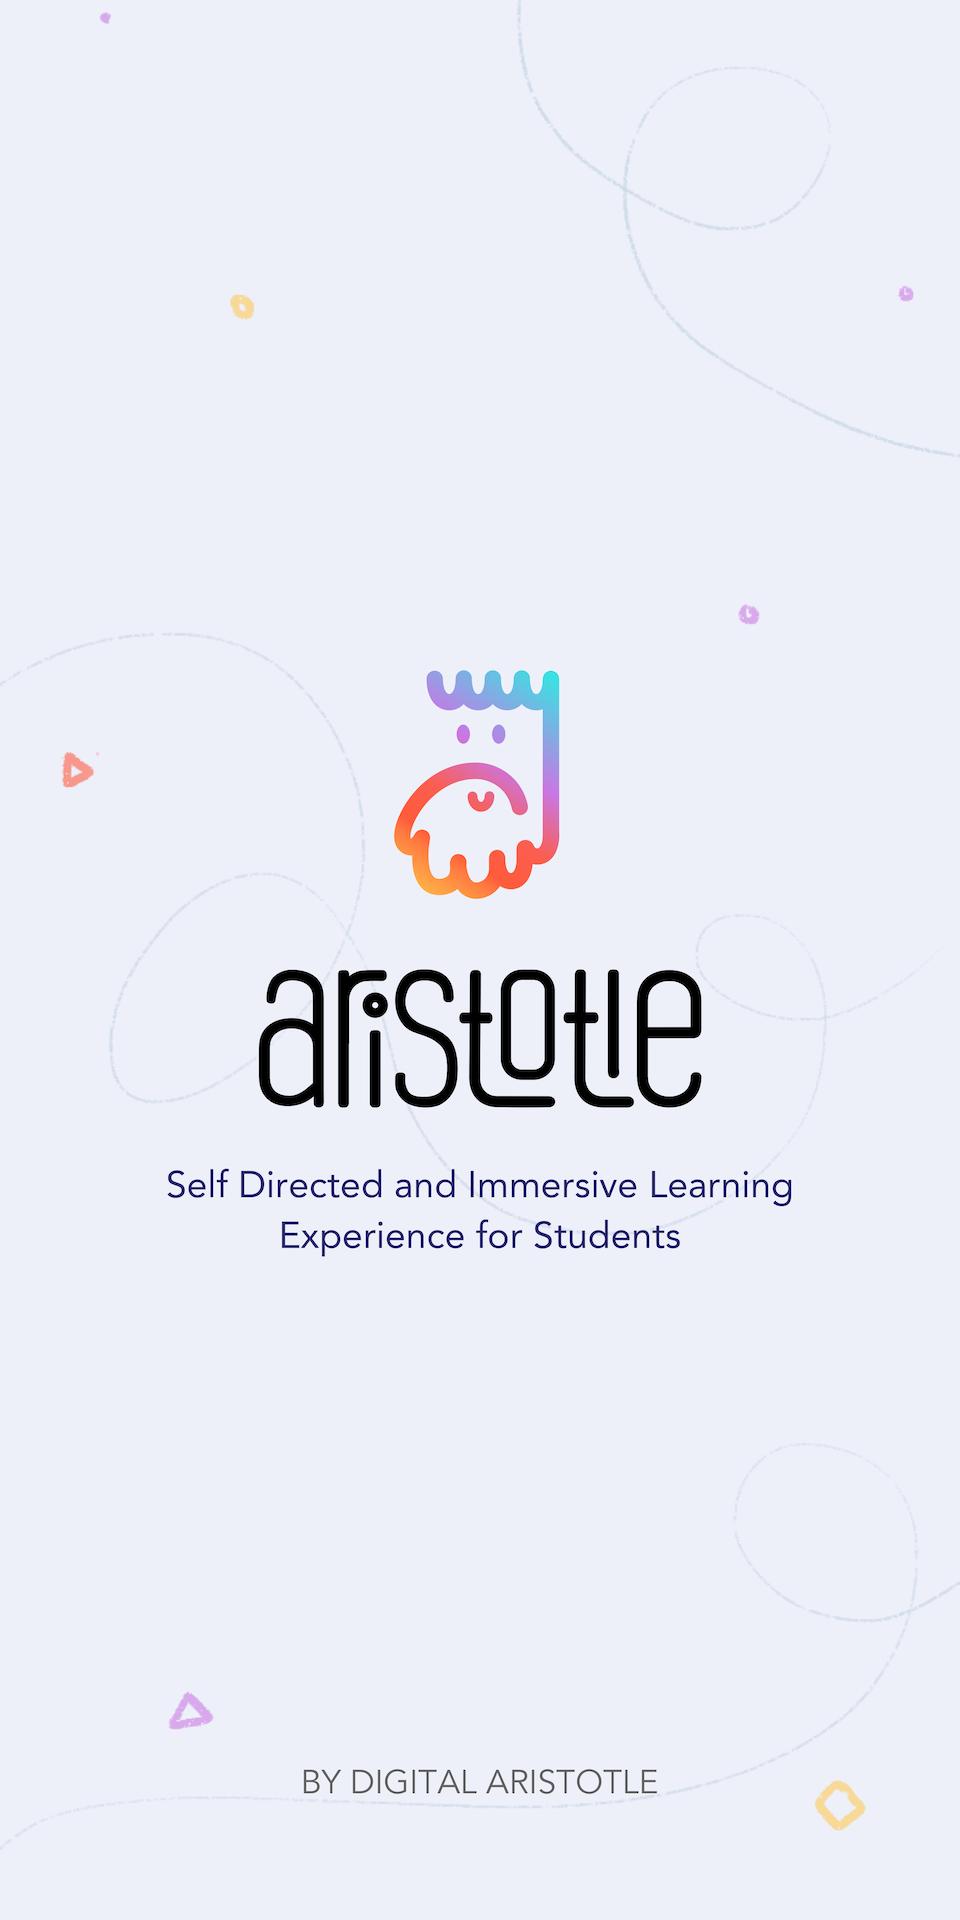 Aristotle - The Learning App